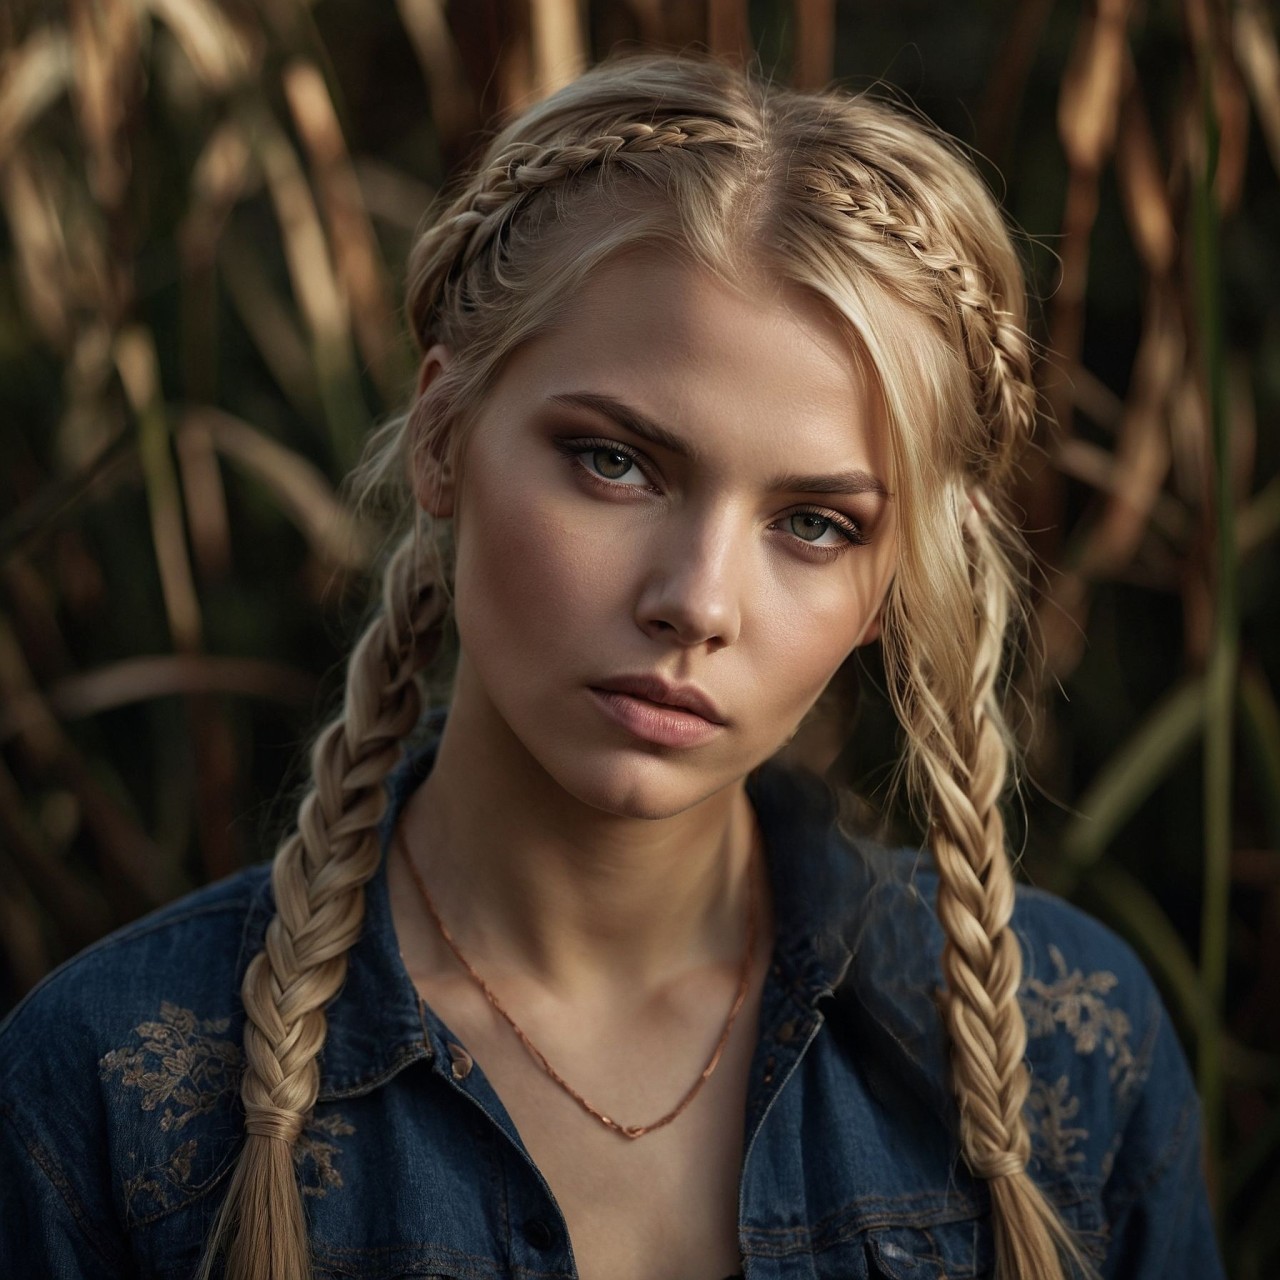 Blonde Middle Parted Braided Pigtails with Mini French Braids At Sides